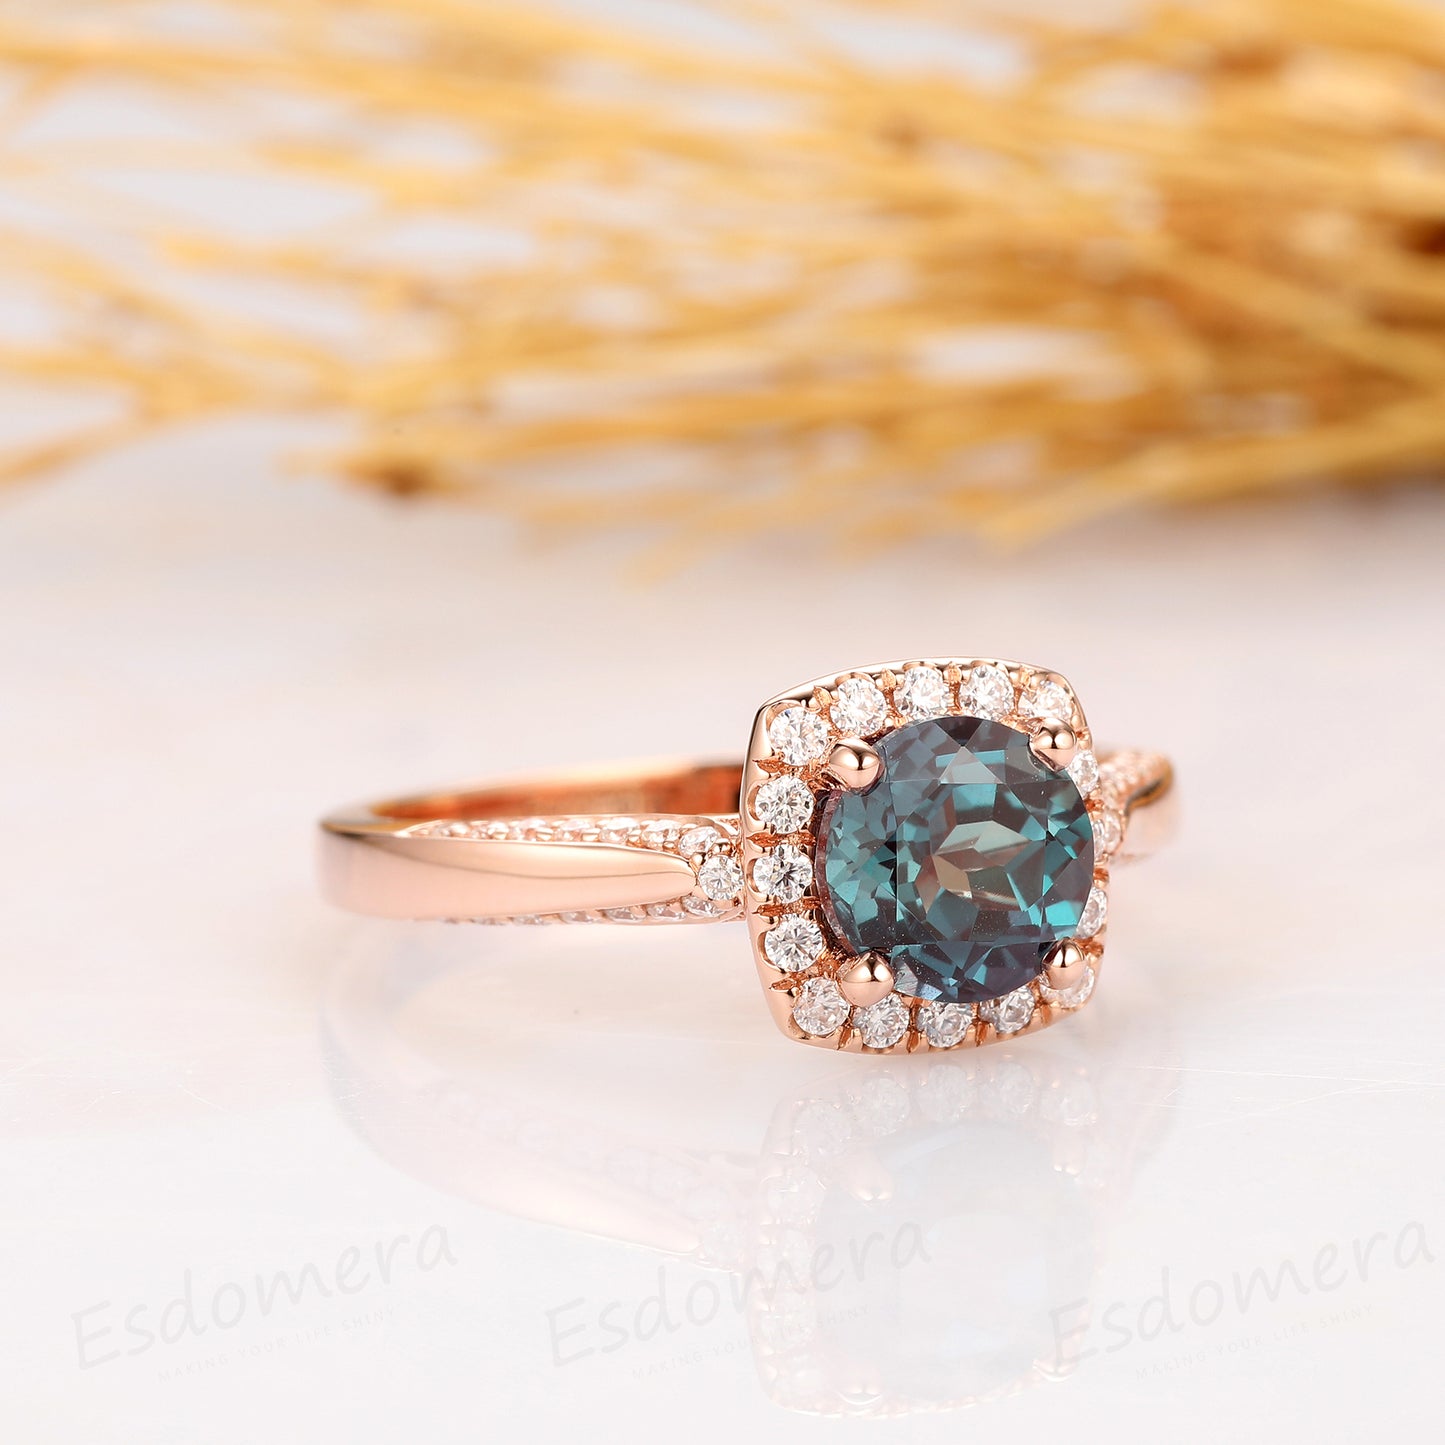 1.25ct Round Cut Alexandrite Ring, Halo Accents 14k Rose Gold Antique Filigree Engagement Ring